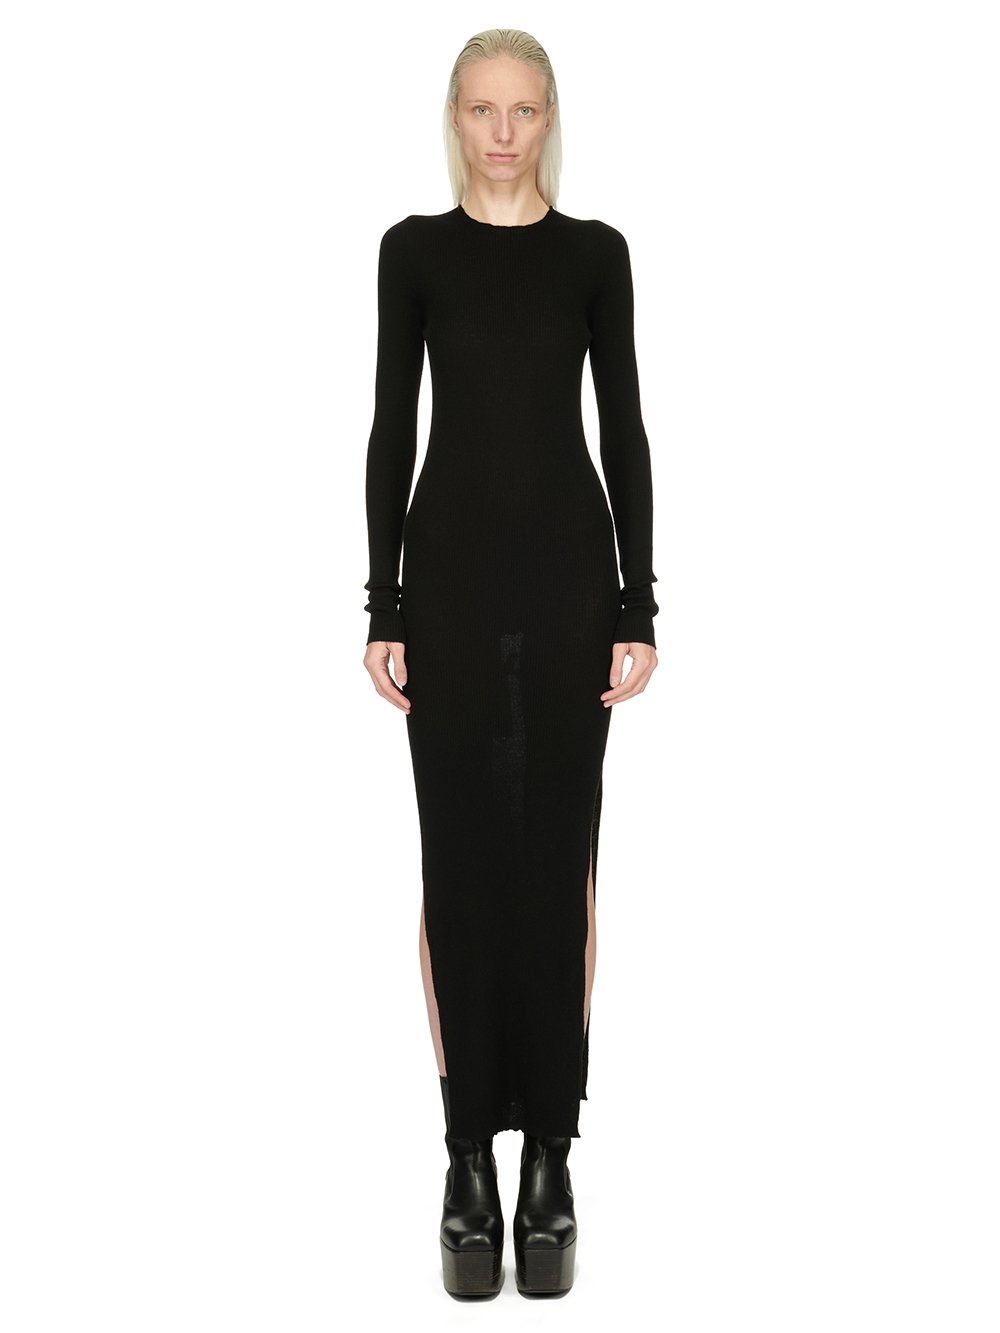 RICK OWENS FW23 LUXOR RIBBED ROUND NECK DRESS IN BLACK LIGHTWEIGHT RIBBED KNIT